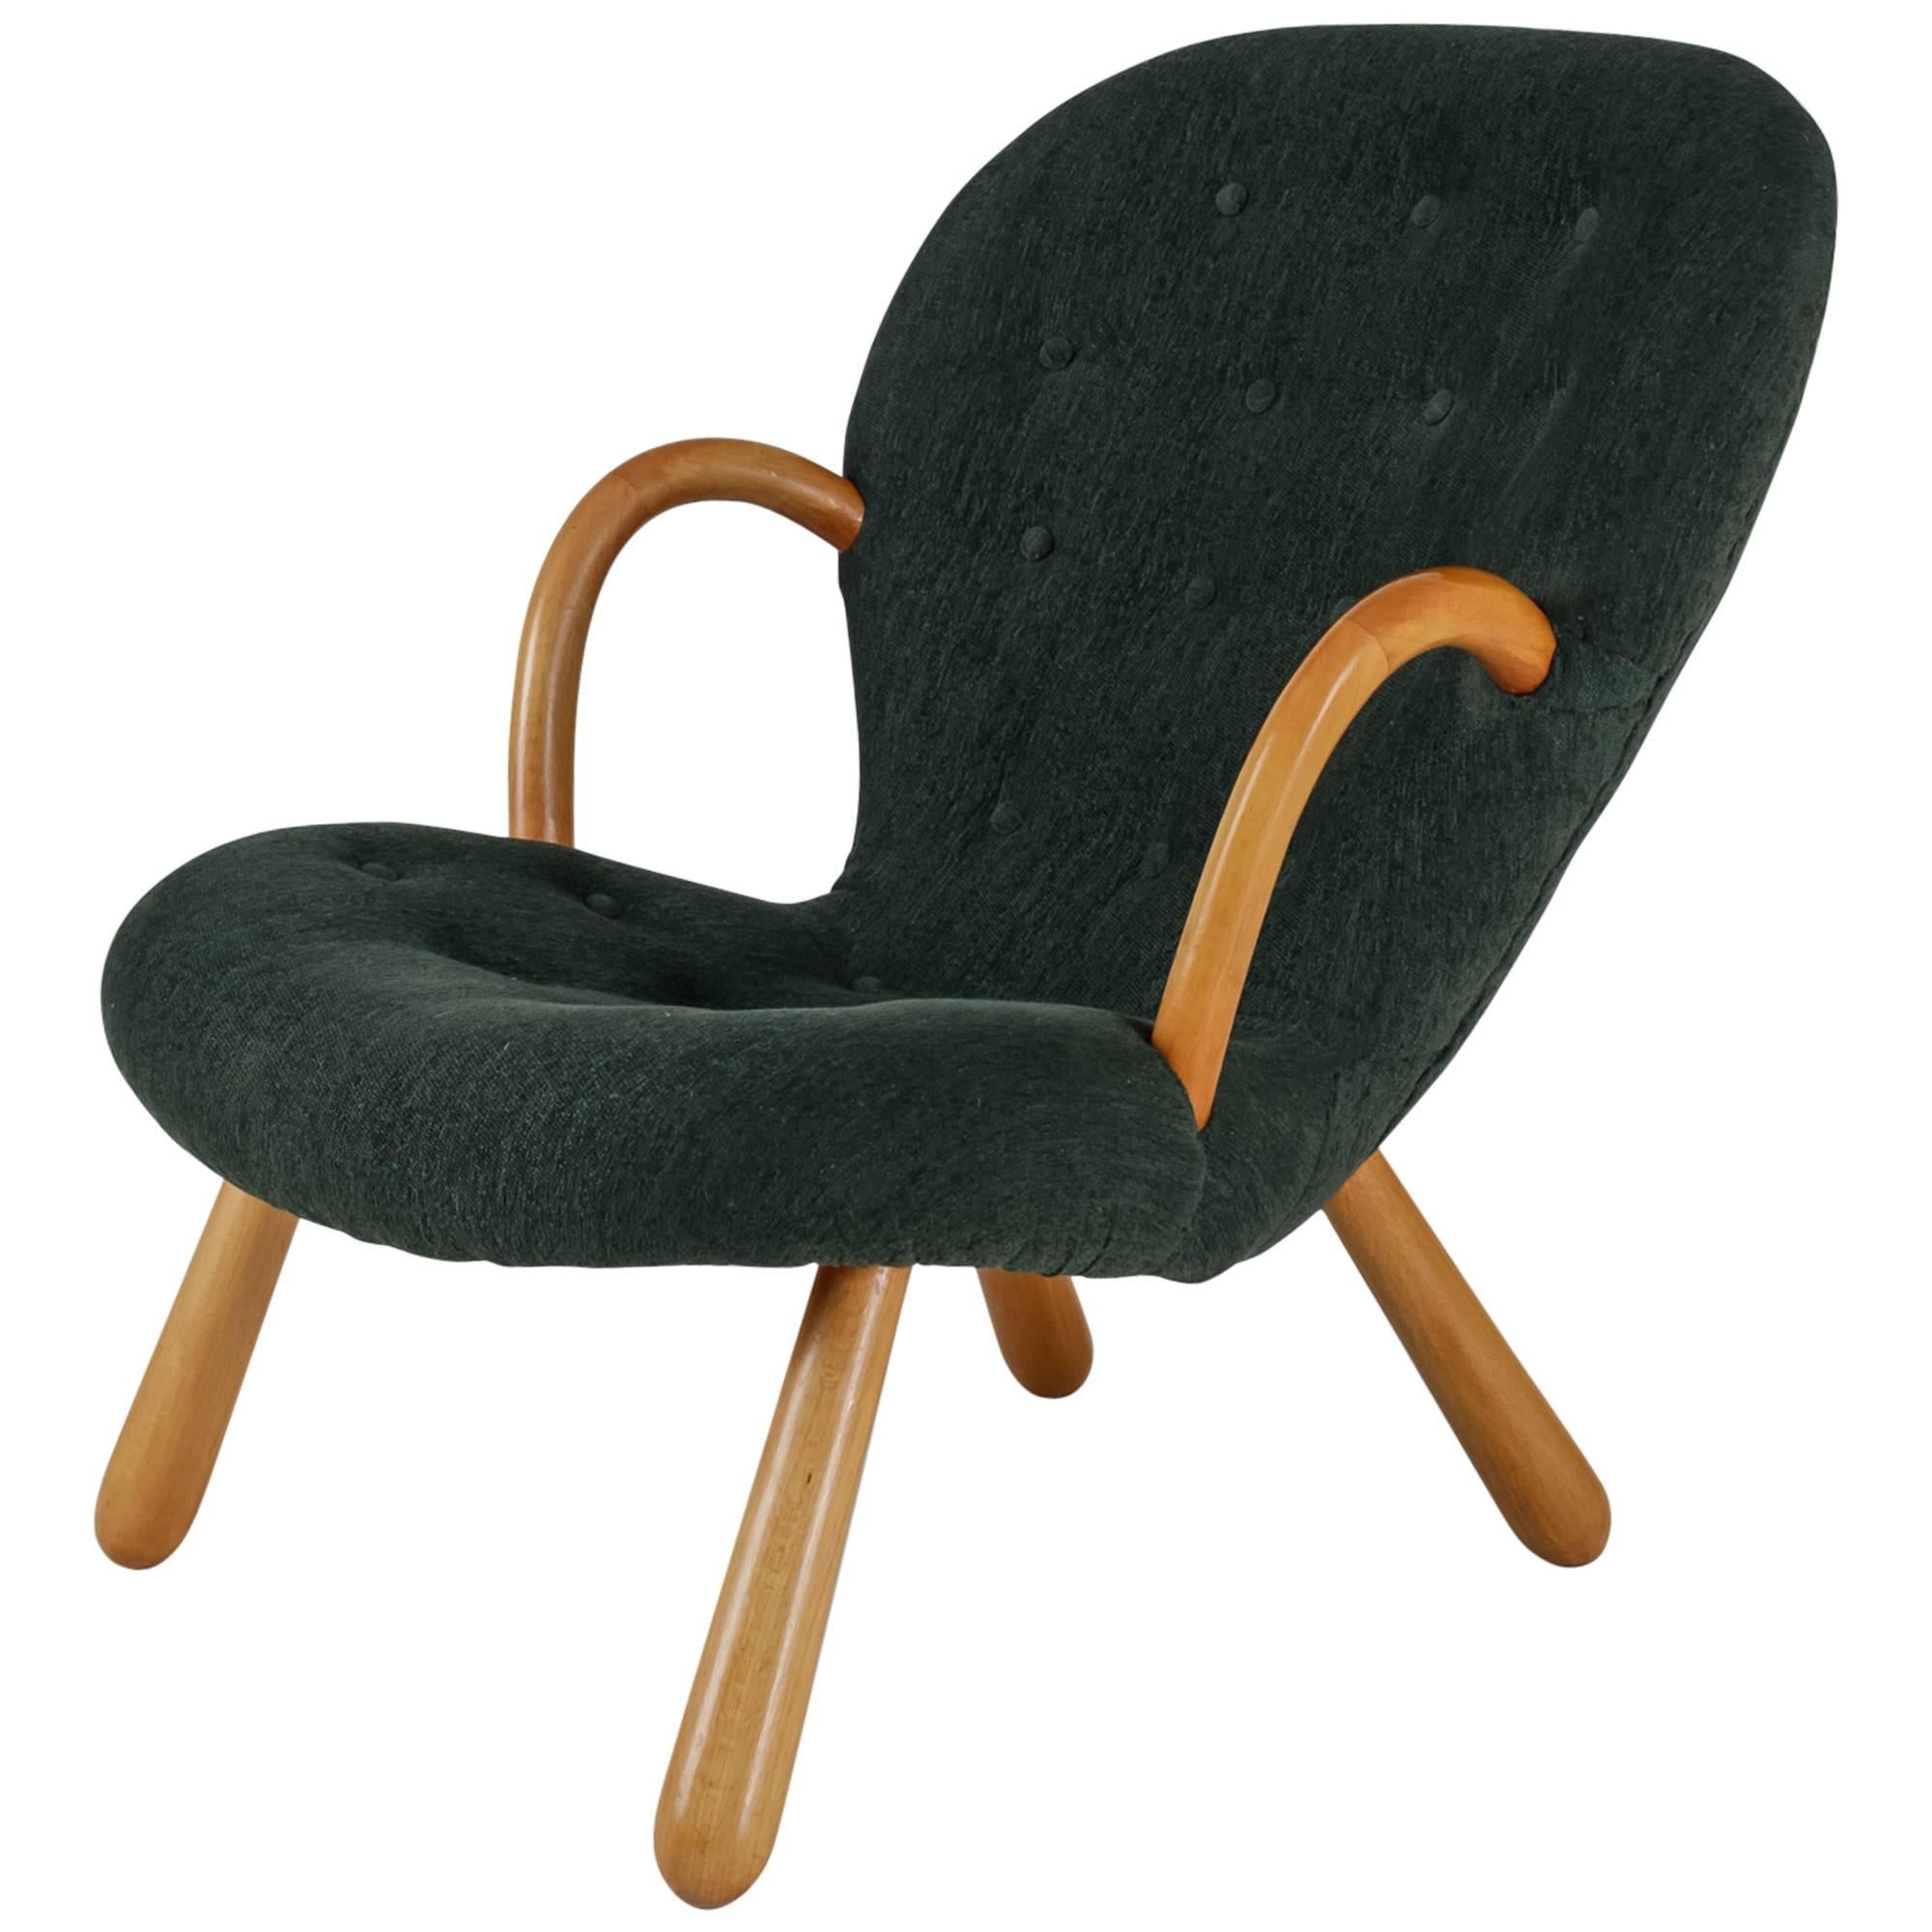 Philip Arctander Clam Chair with Green Upholstery, Denmark, 1940s For Sale